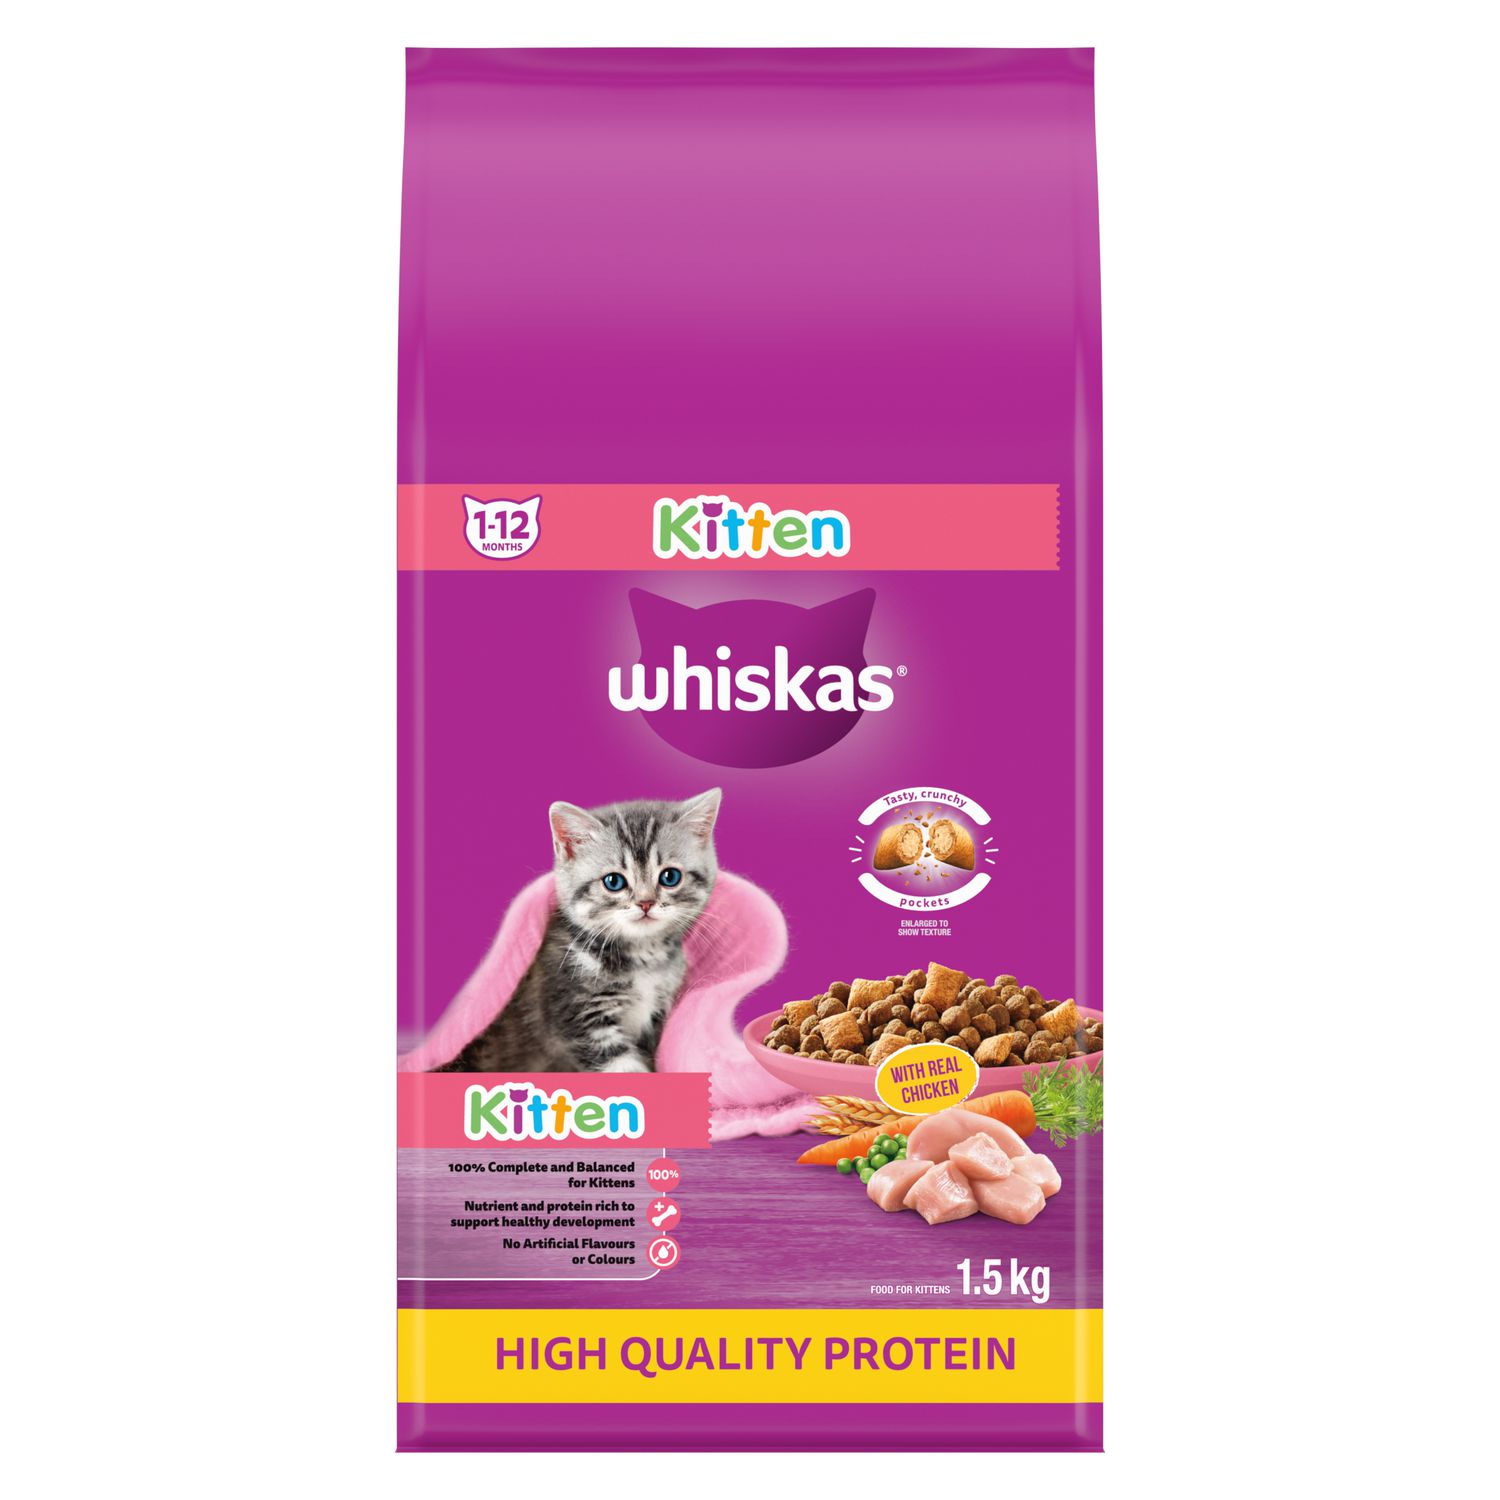 Whiskas Kitten with Real Chicken, 1.5kg, Dry CAT Food Walmart Canada